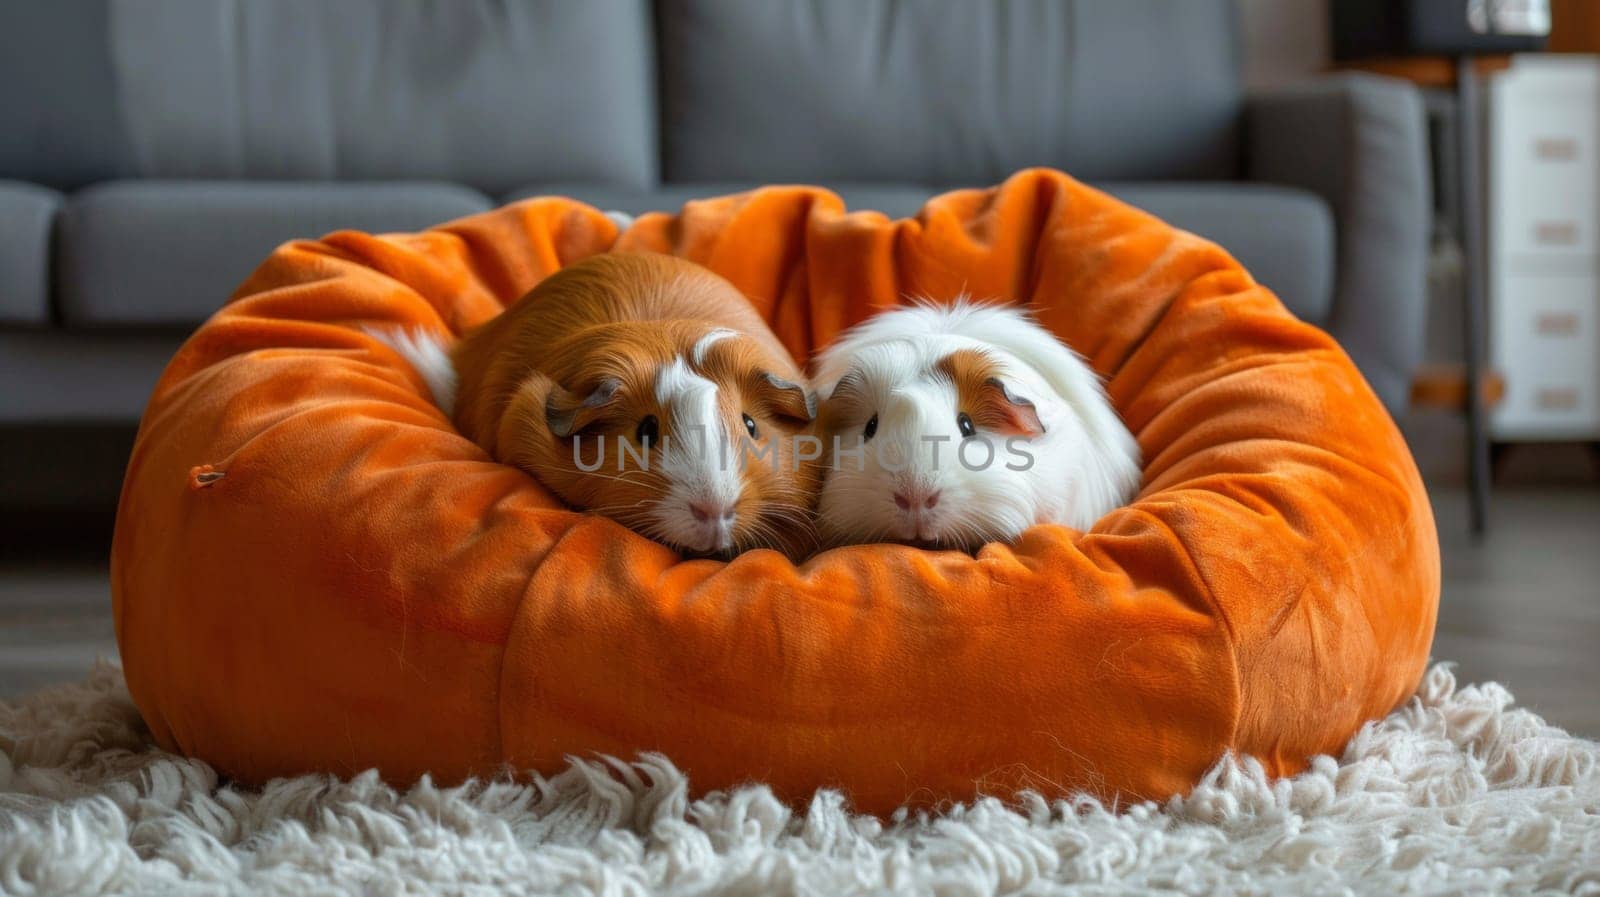 Two small guinea pigs are laying in a large orange pillow, AI by starush